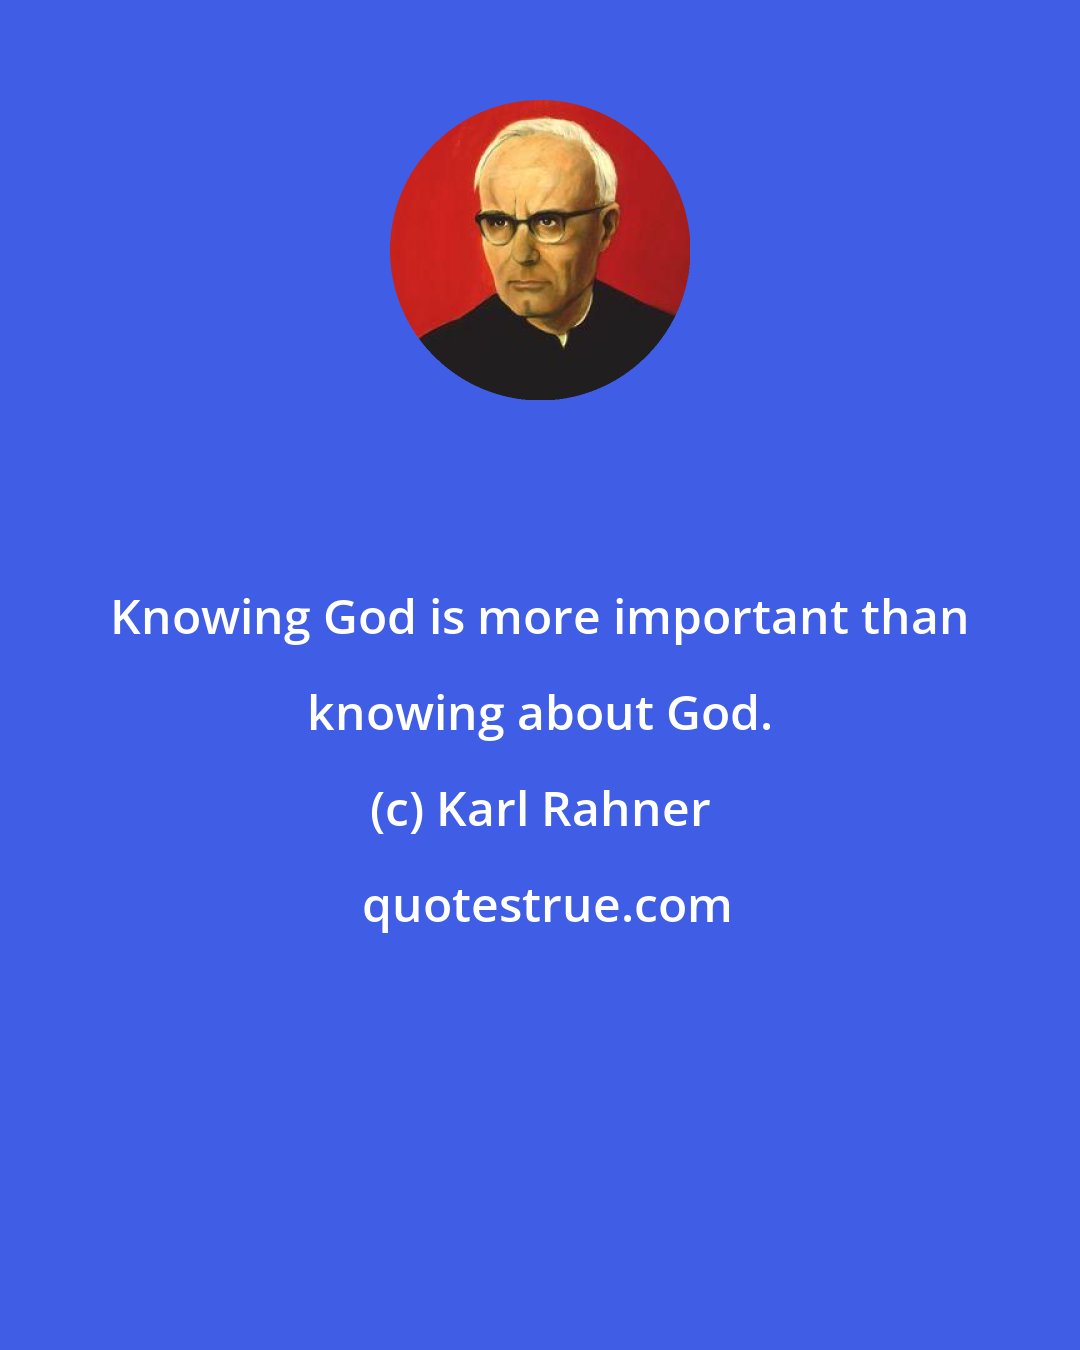 Karl Rahner: Knowing God is more important than knowing about God.